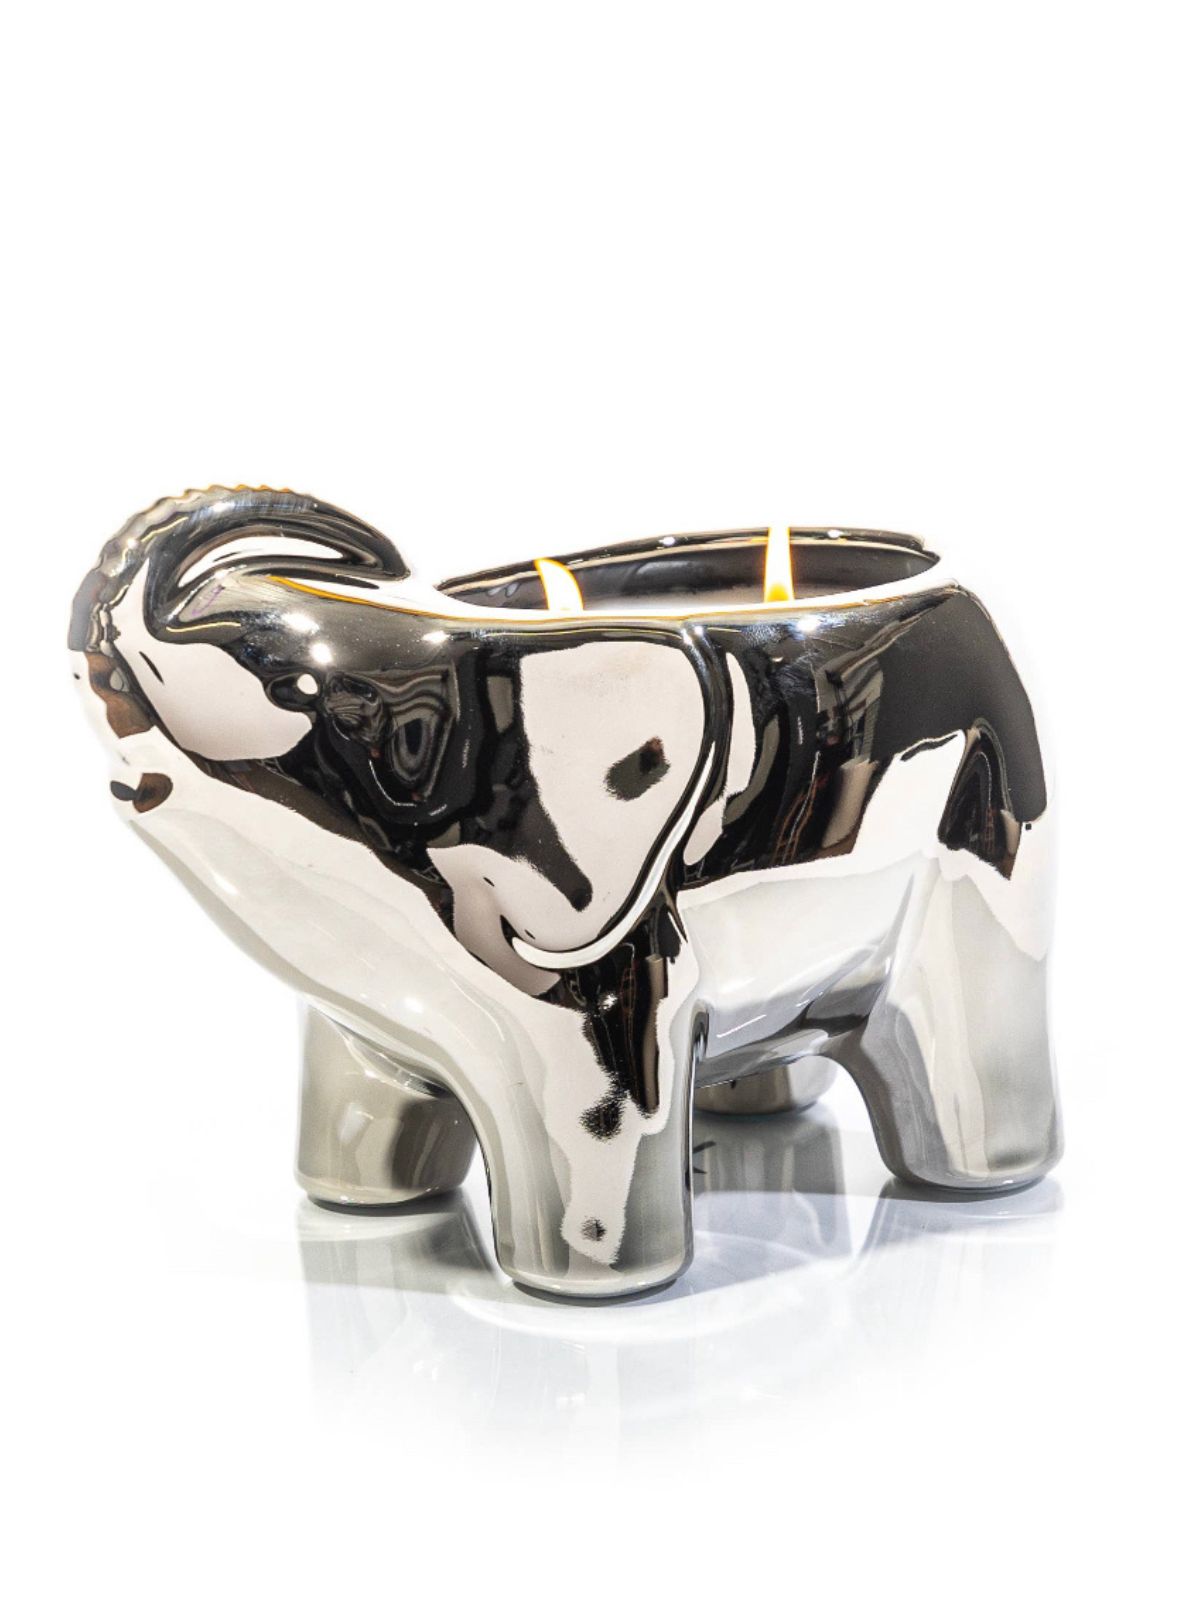 This elegant silver elephant candle is designed and finished by hand sculpting the ceramic of each vessel. These candles are then hand filled with a proprietary soy wax blend, all natural essential oils, and 2 cotton wicks to provide a clean burn.